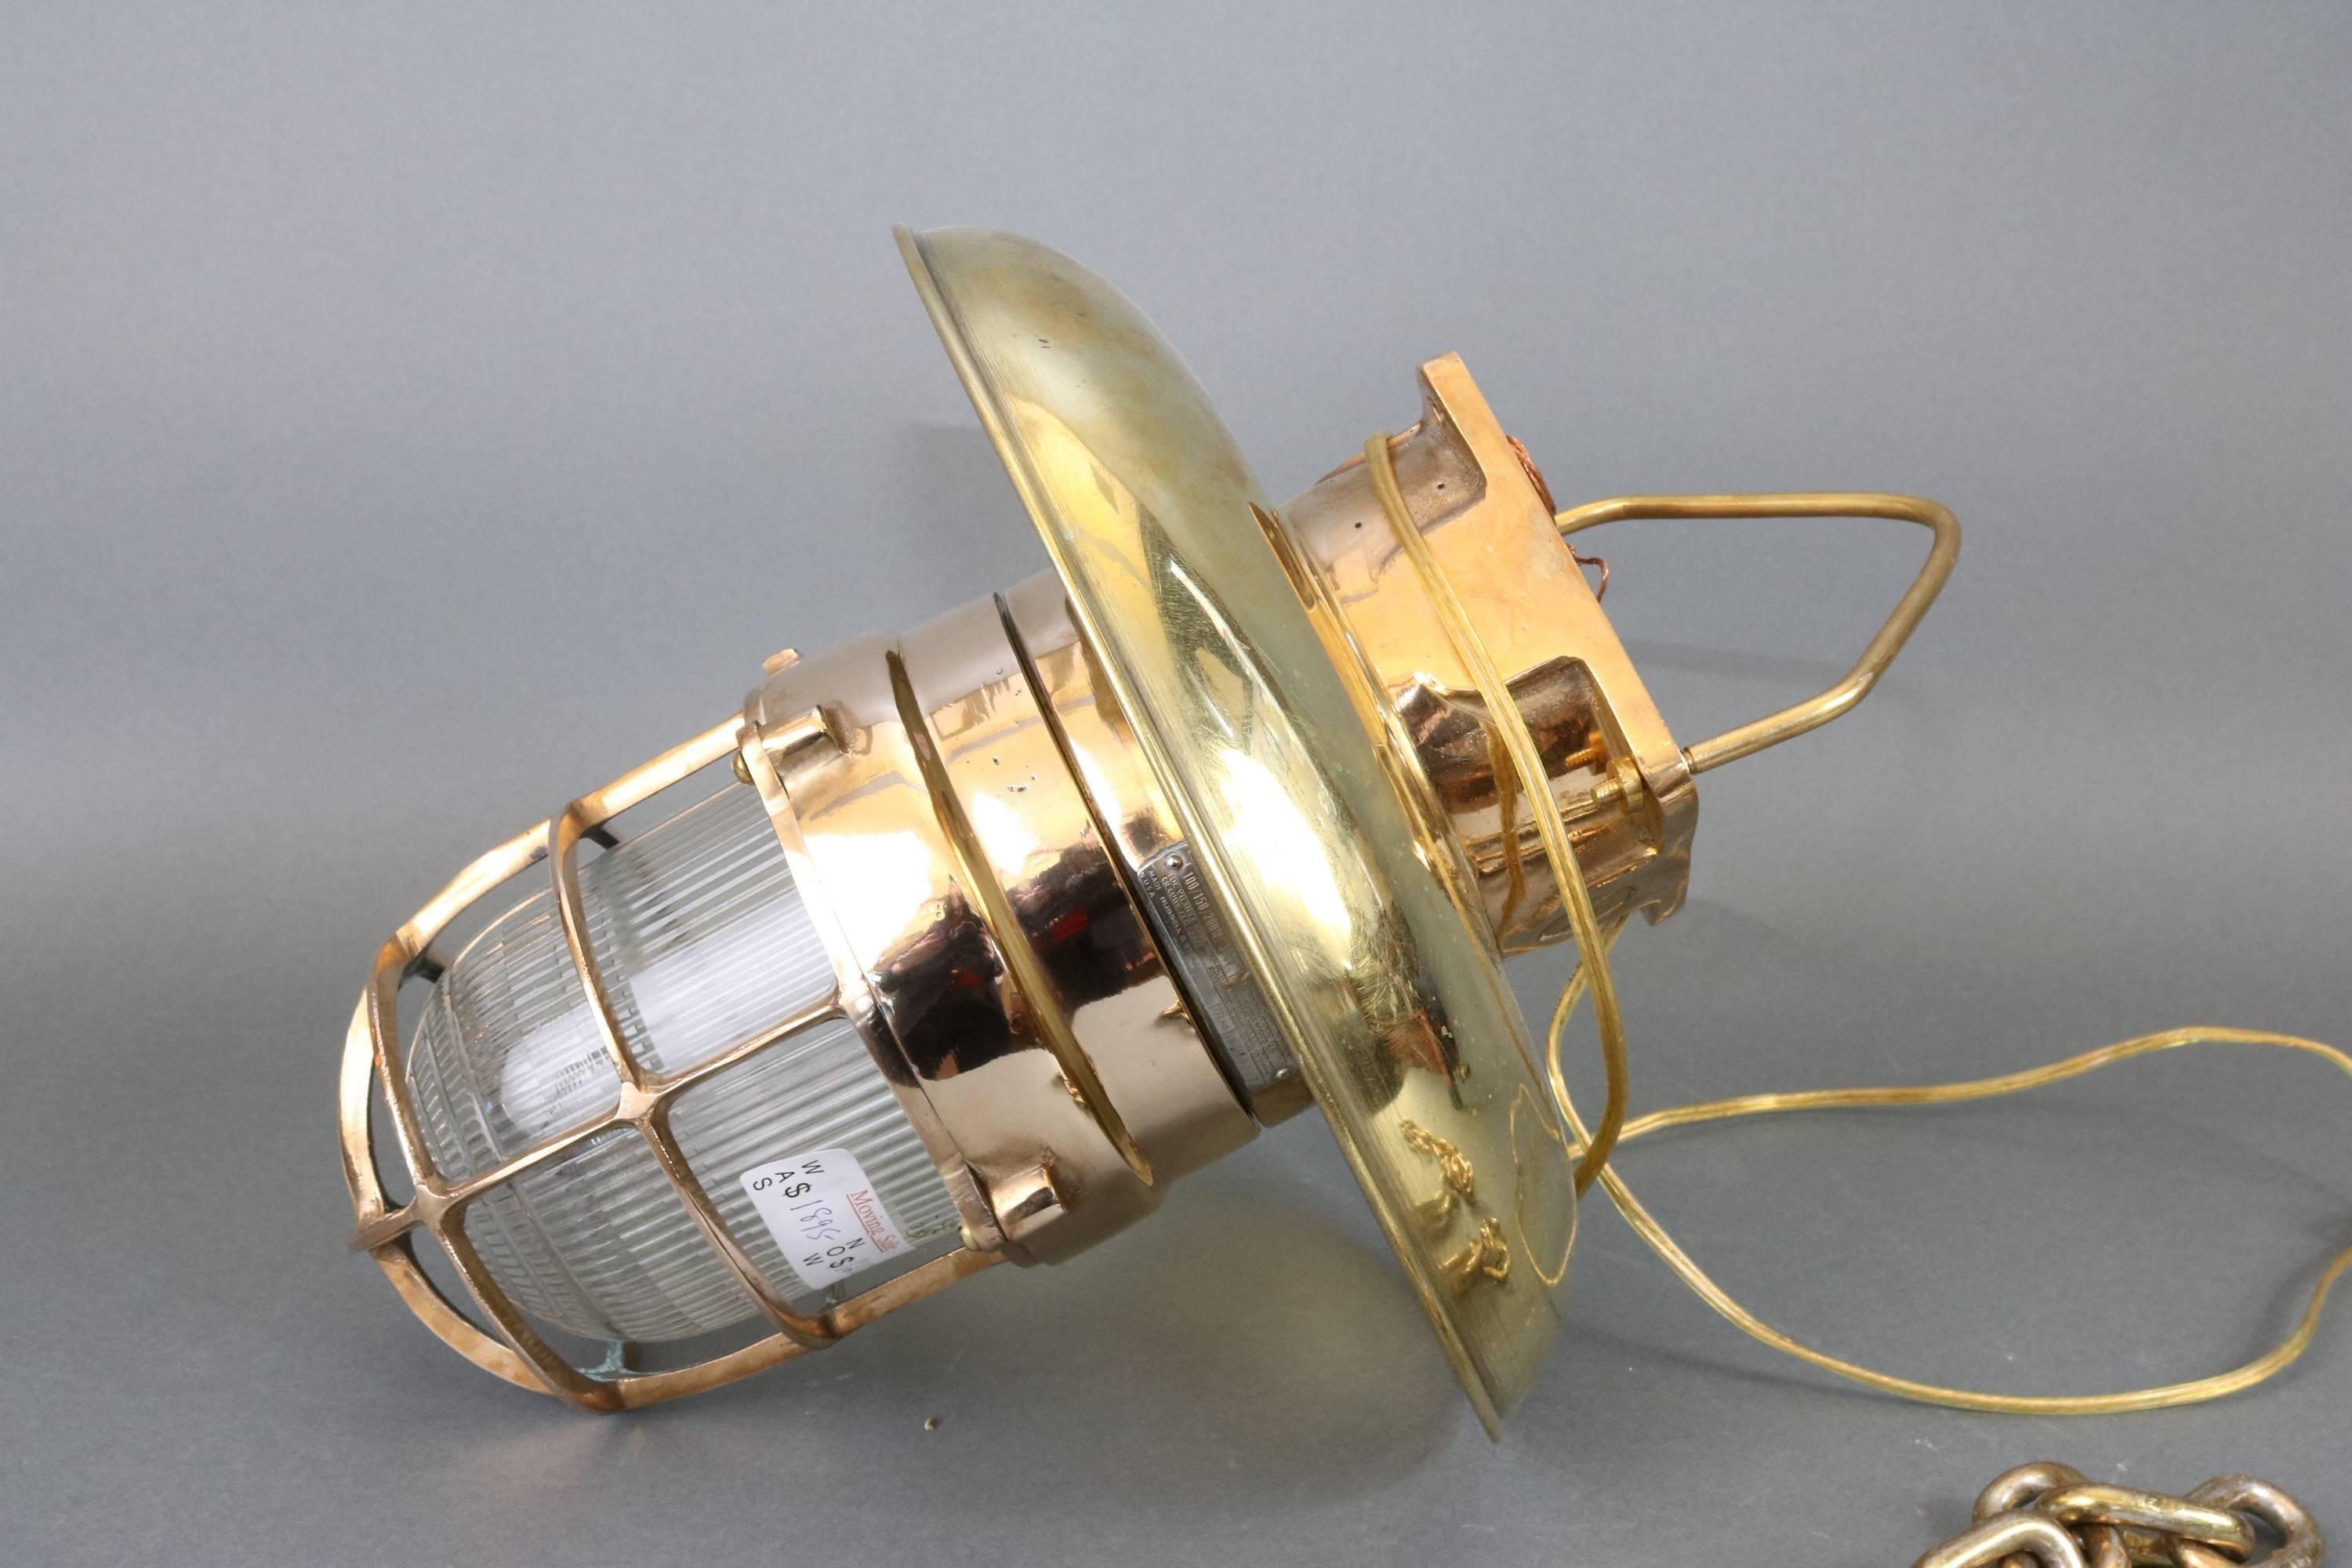 Solid brass ship's light with hood. Heavy hanging fixture with hanging chain, spun brass hood, fresnel lens, protective brass cage. Measures: 13 x 14.